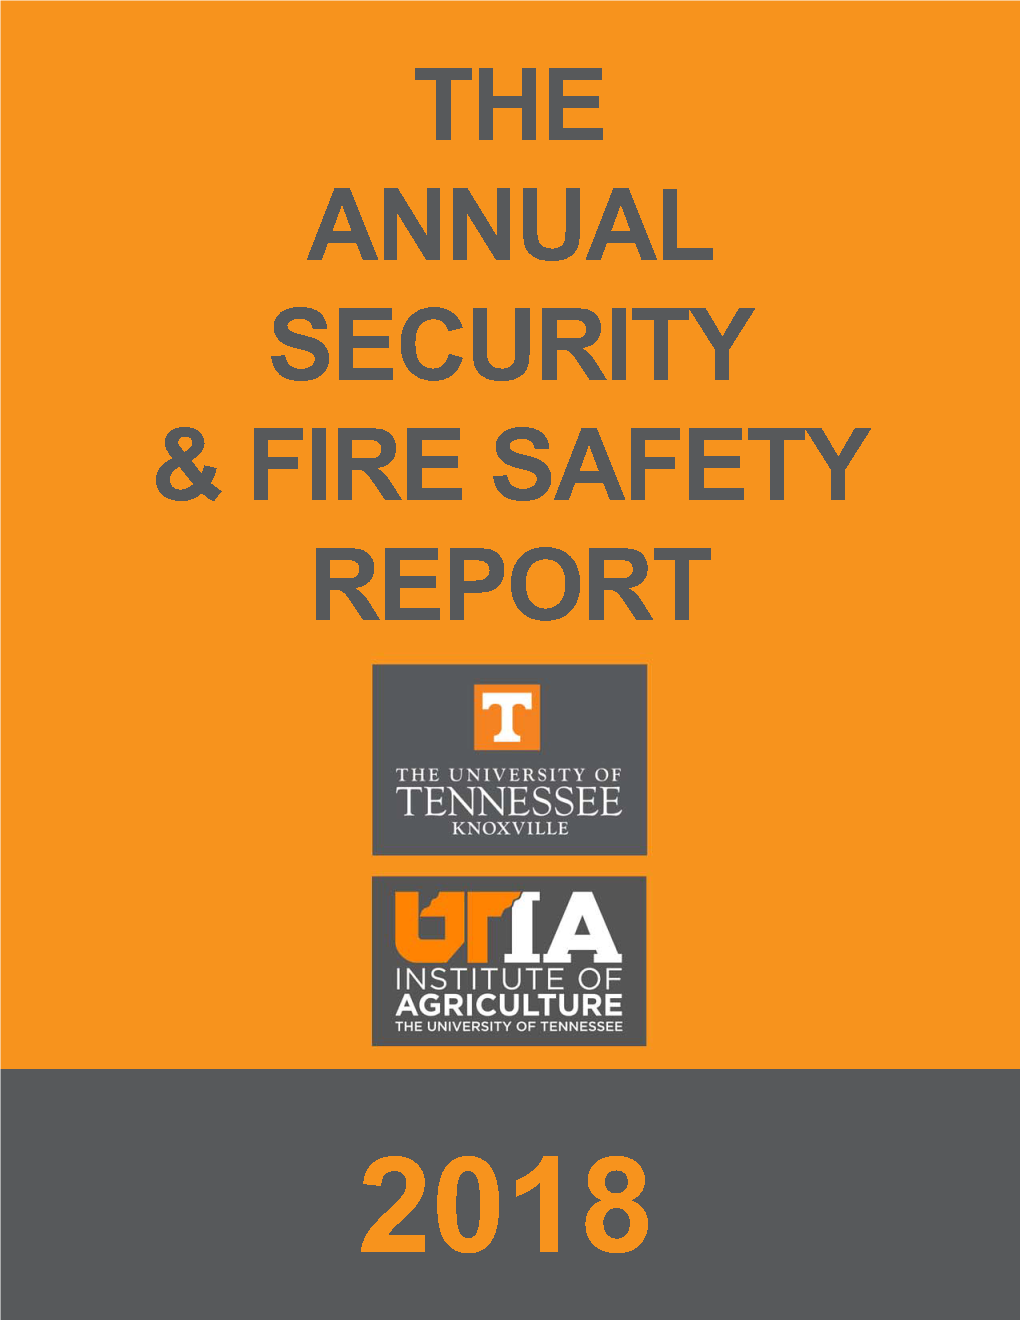 2018 Annual Security & Fire Safety Report